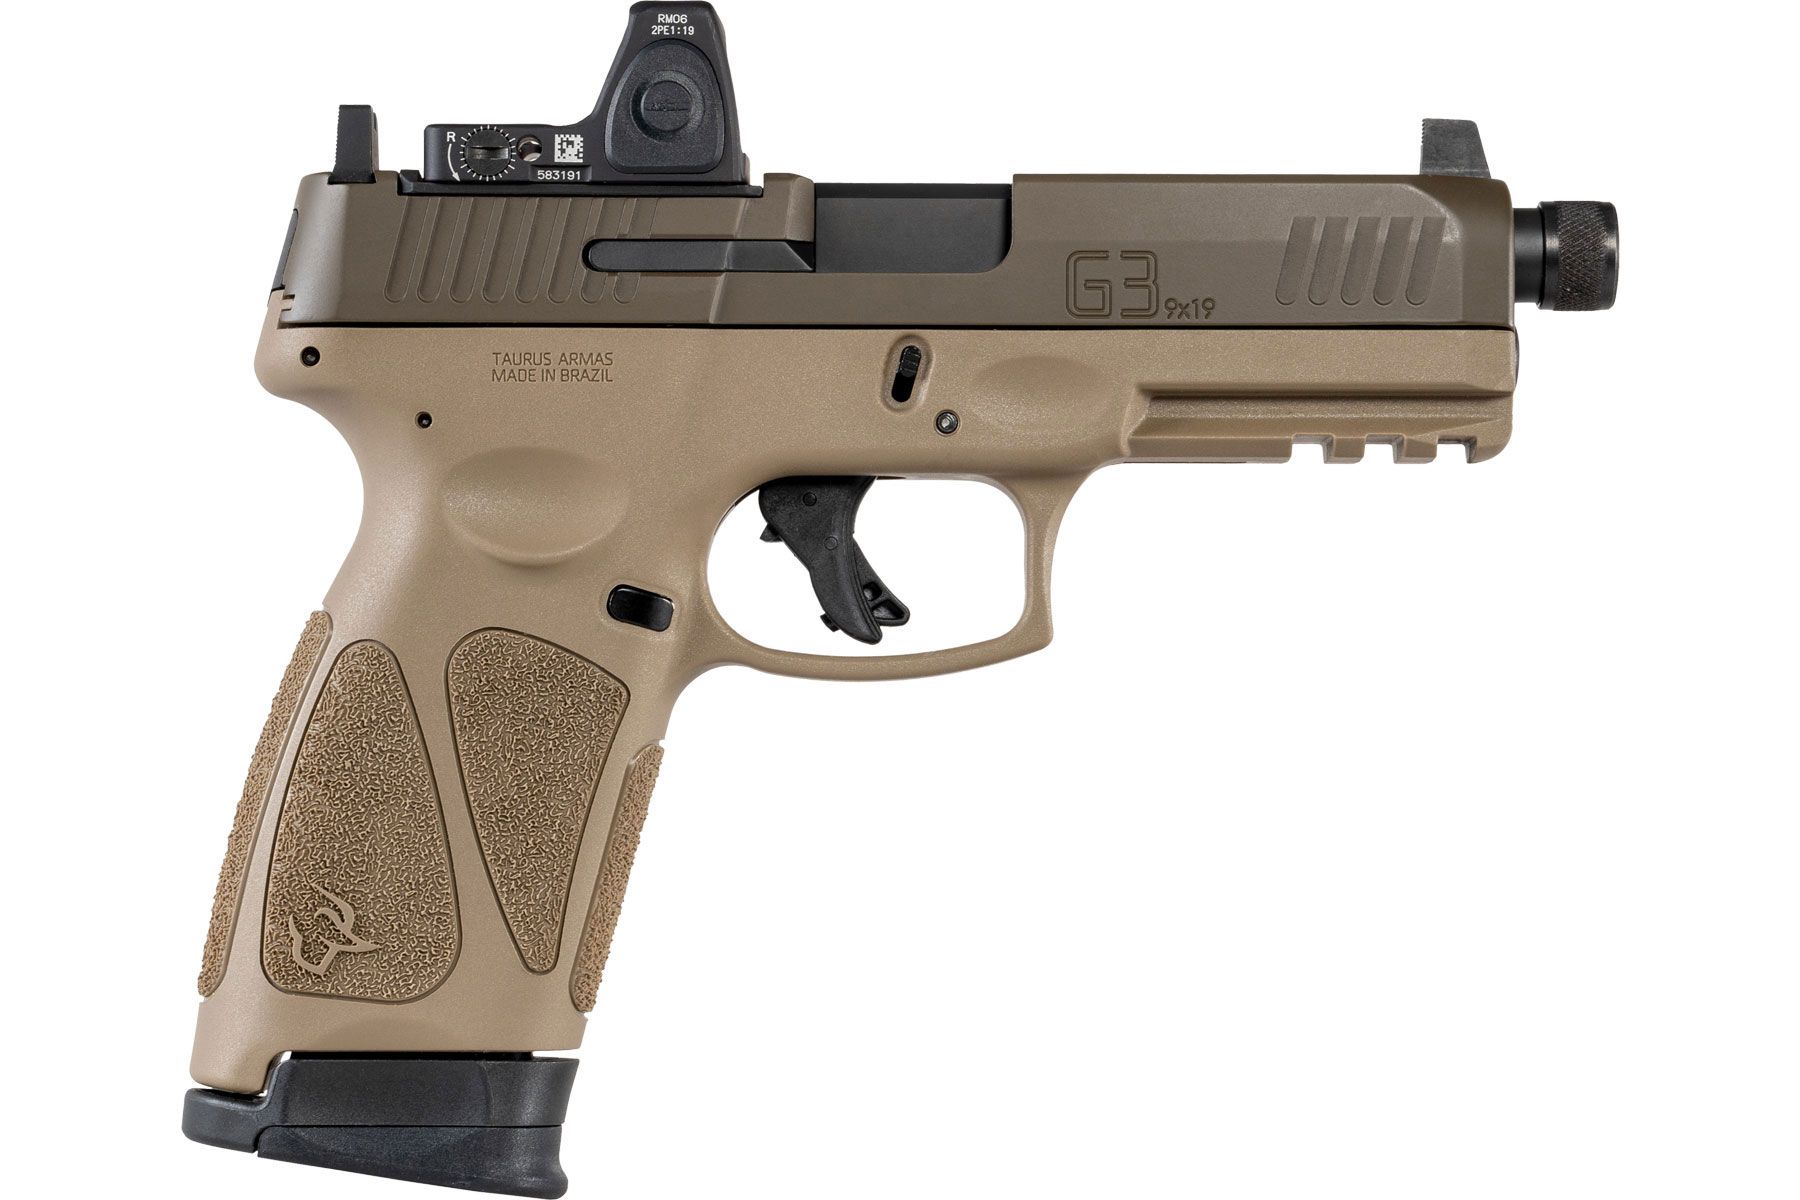 Taurus G3 Tactical T.O.R.O. Cerakote Patriot Brown Tan 9mm Luger Full Size 17 Rds. Tall Co-Witness Sights